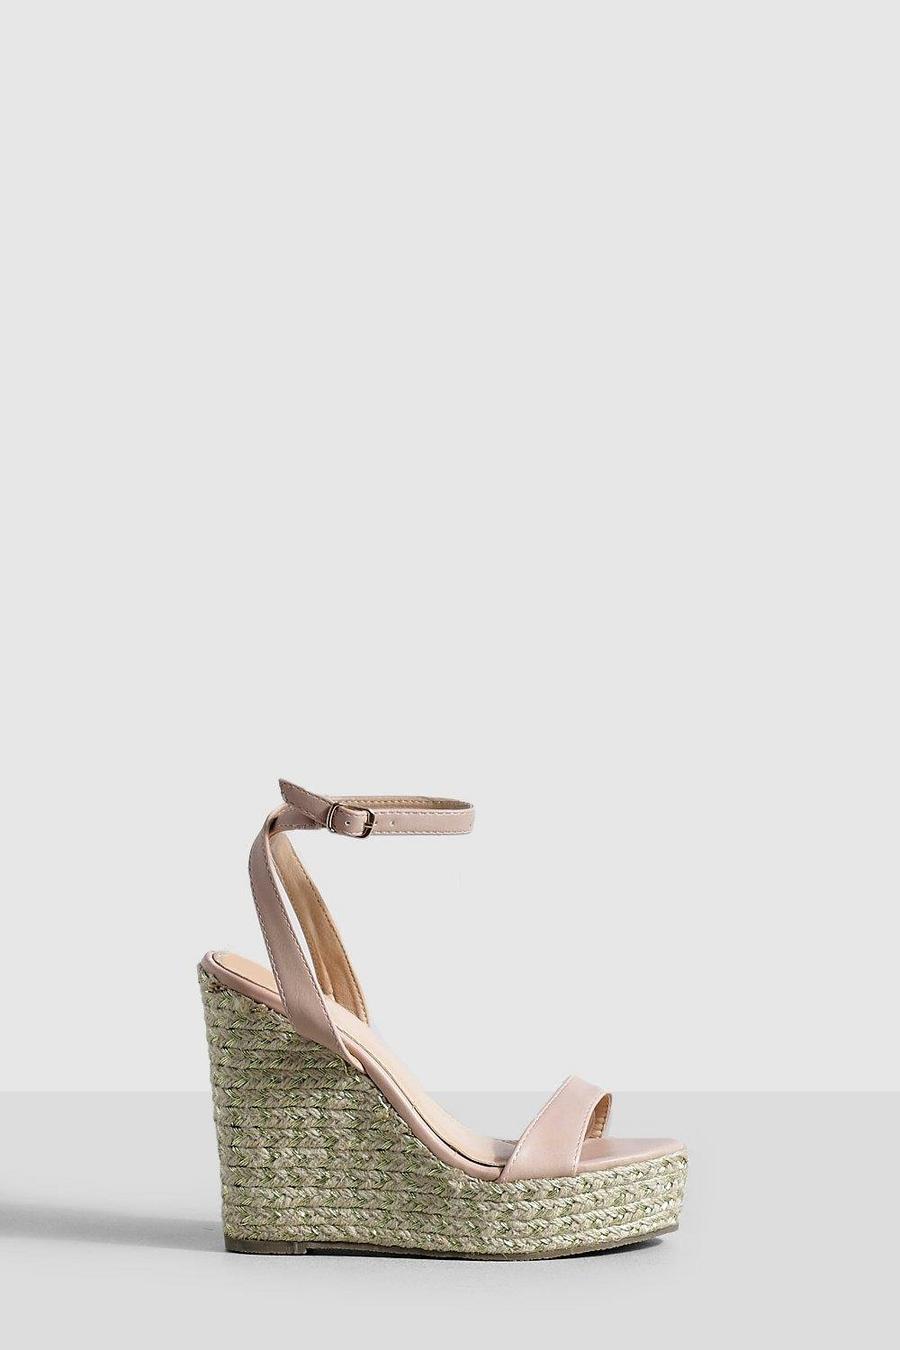 Blush pink Two Part Round Toe Wedges 